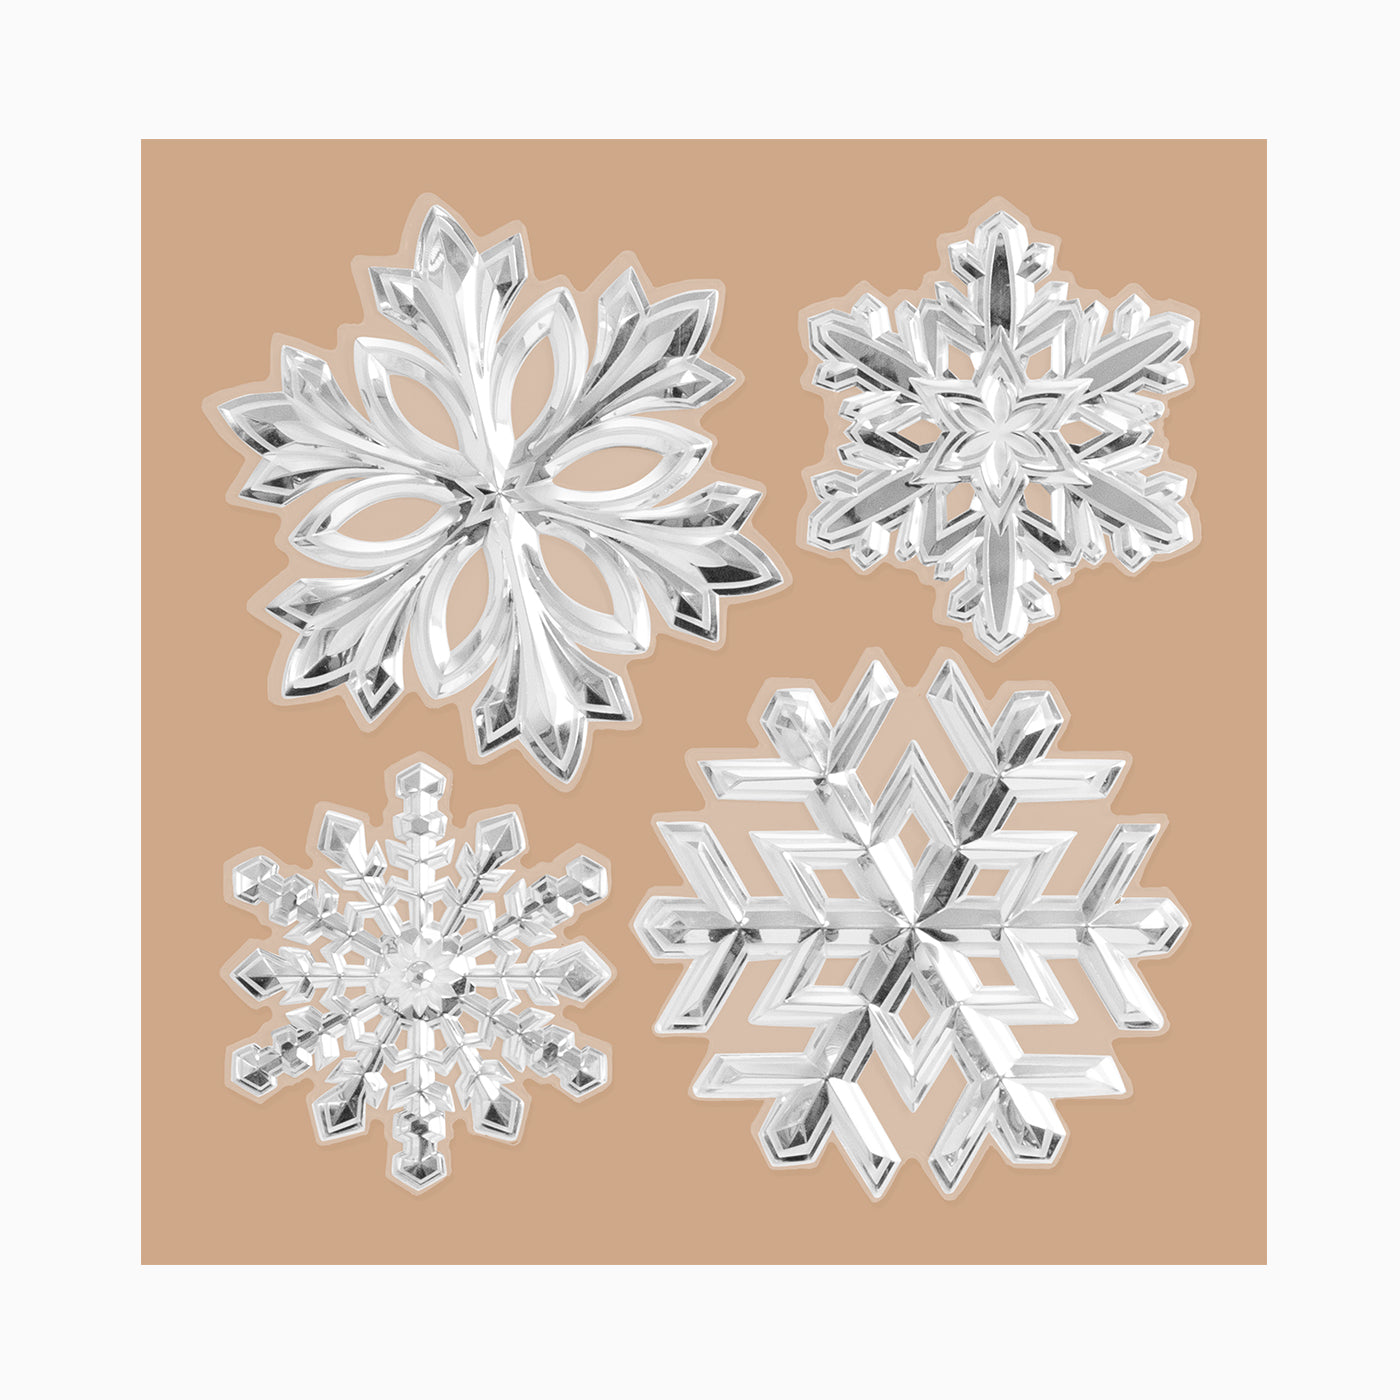 Silver snow flakes features stickers